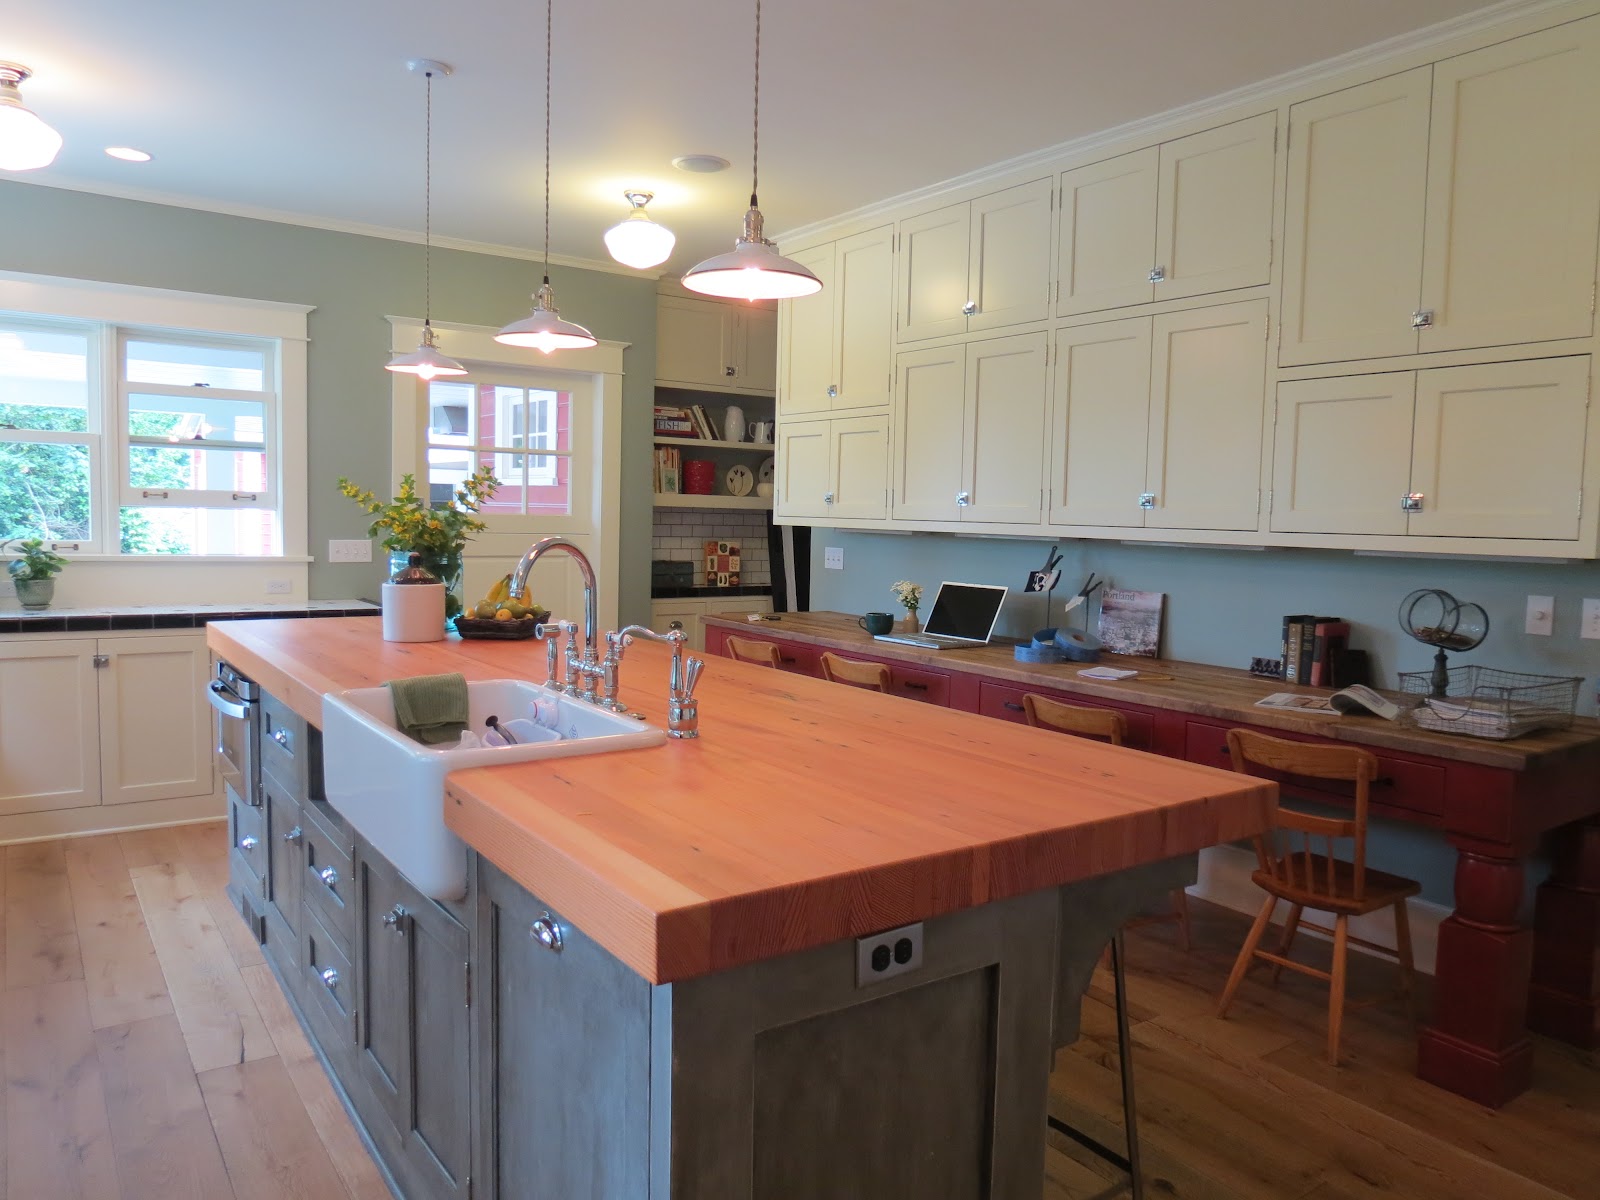 Remodeled Kitchen Island Salvaged Wood Shannons Blog